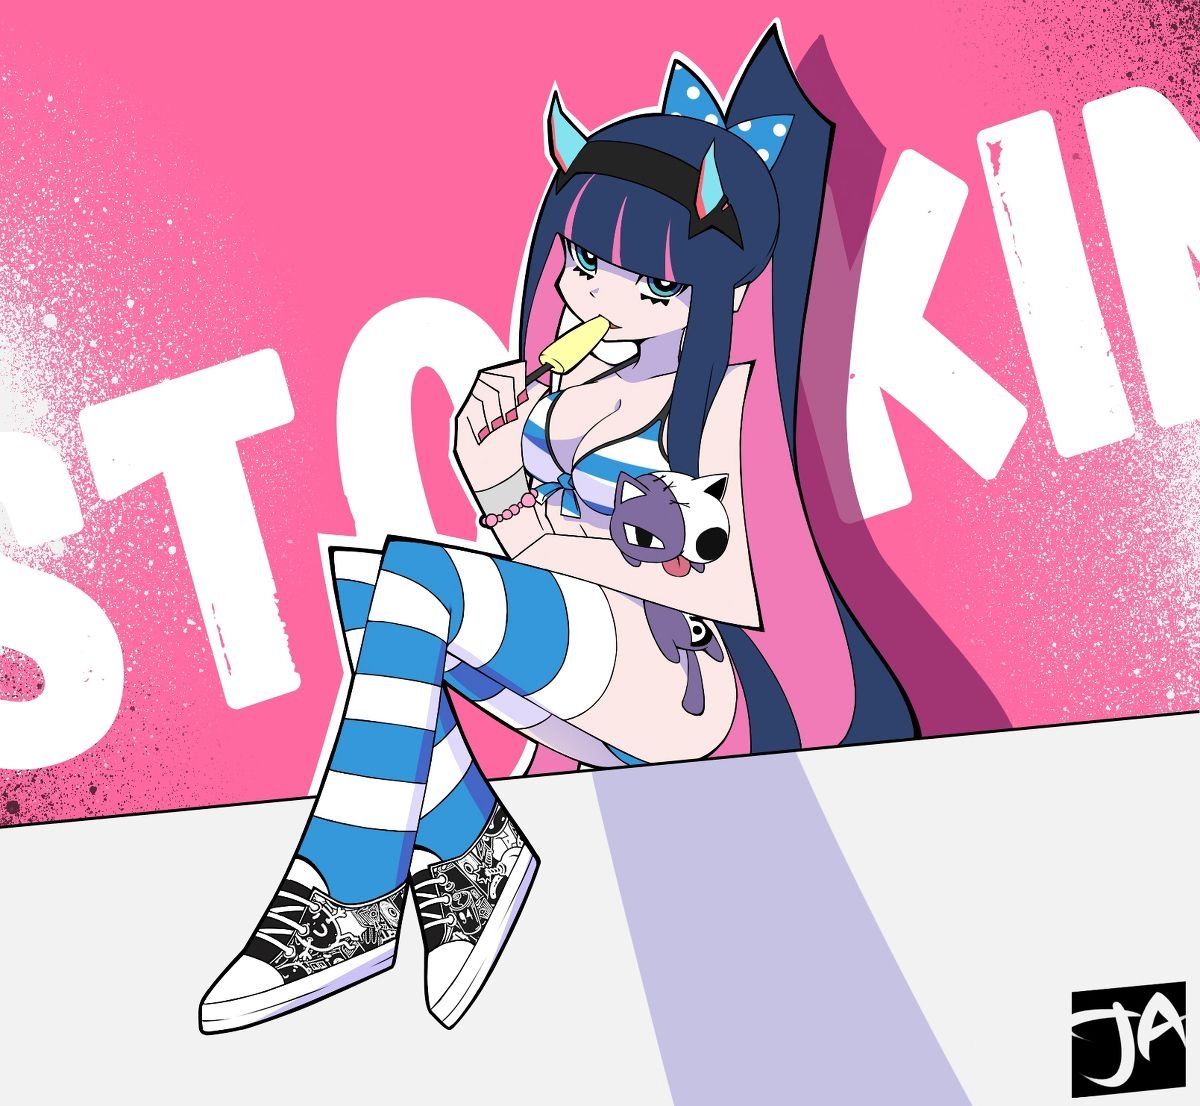 Panty and stocking with Garterbelt этти